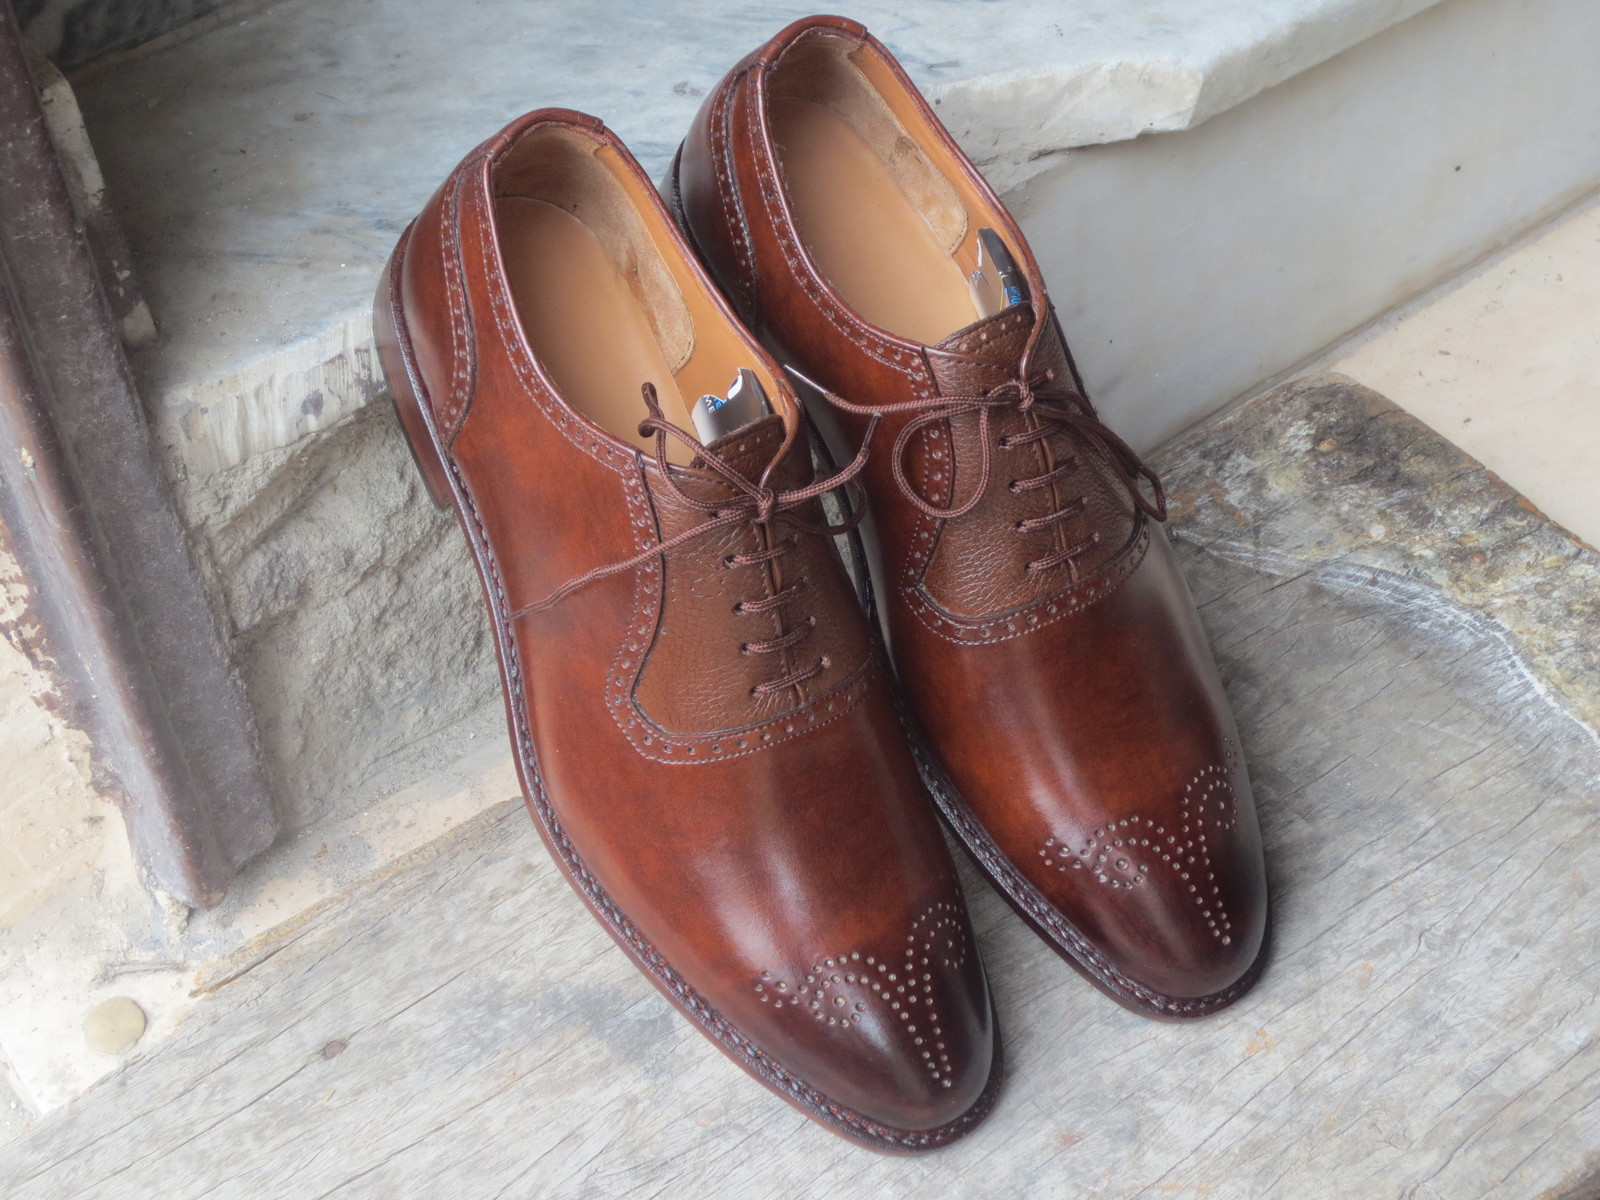 Handmade Brown Brogue Lace Up Pebbled Leather Shoes, Men Dress Formal ...